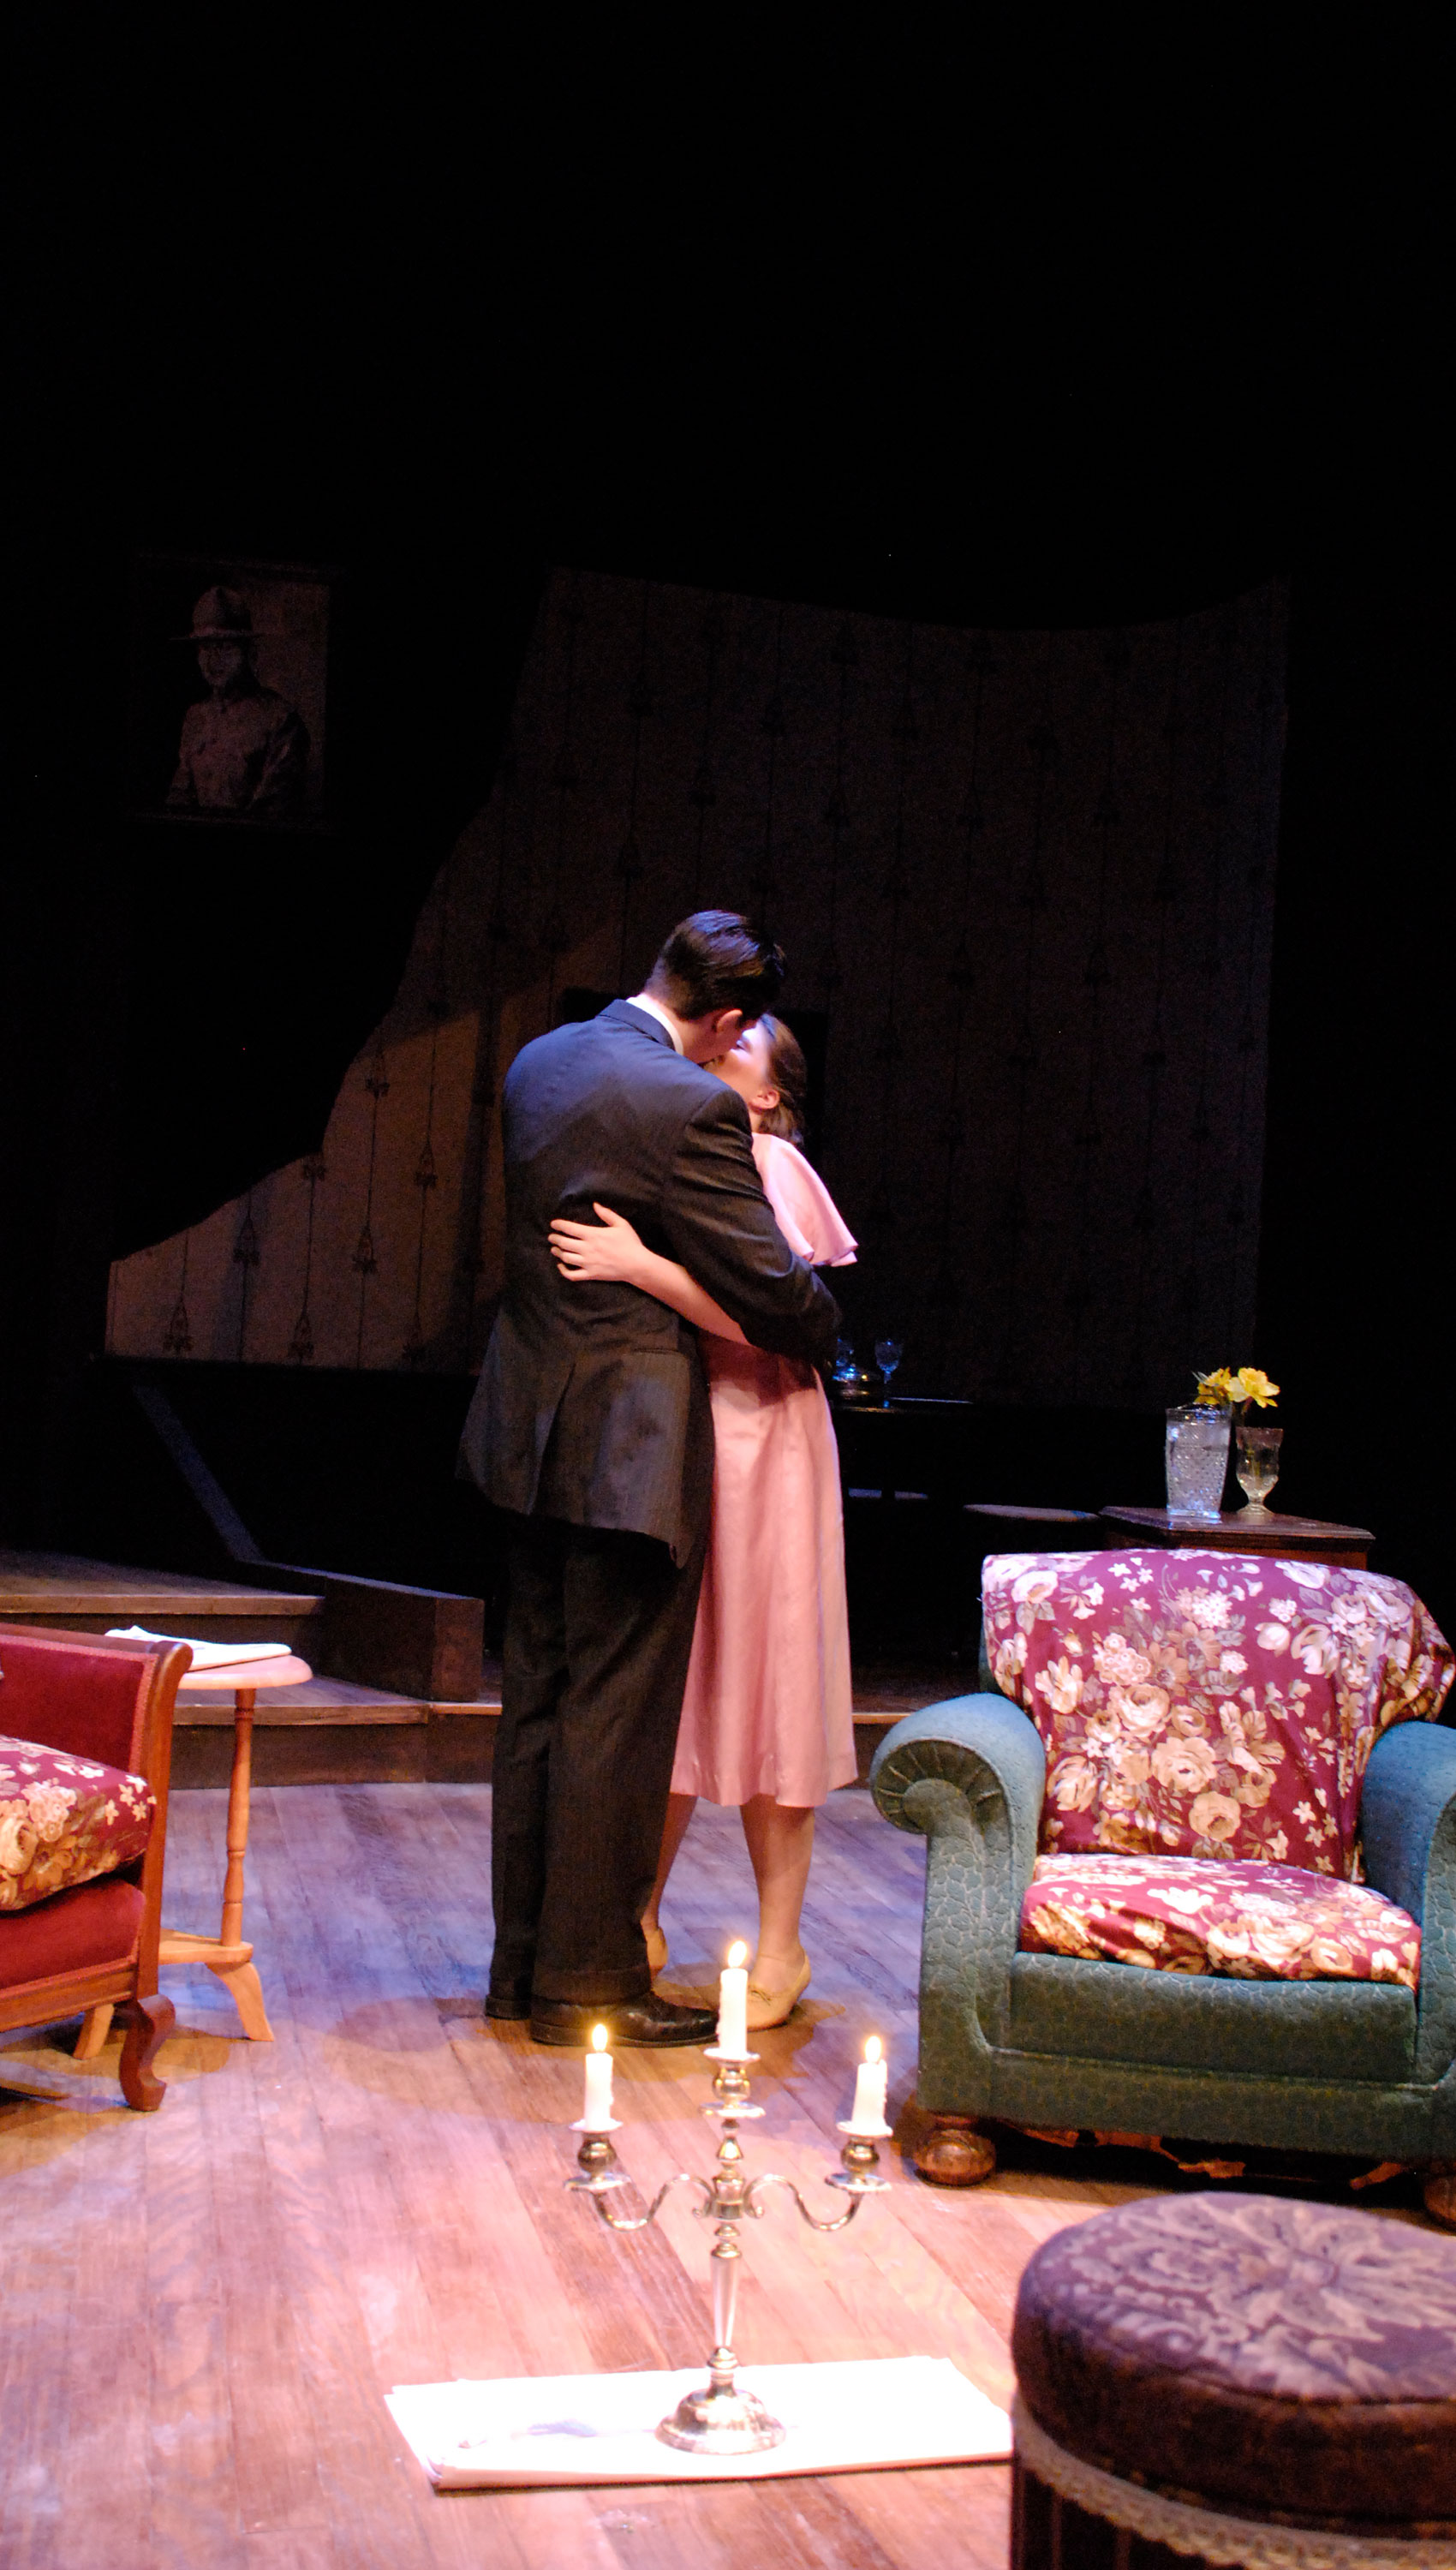 A young man and woman hold each other as they kiss standing in a living room, a lit candelabra on the floor in front of them upstage.